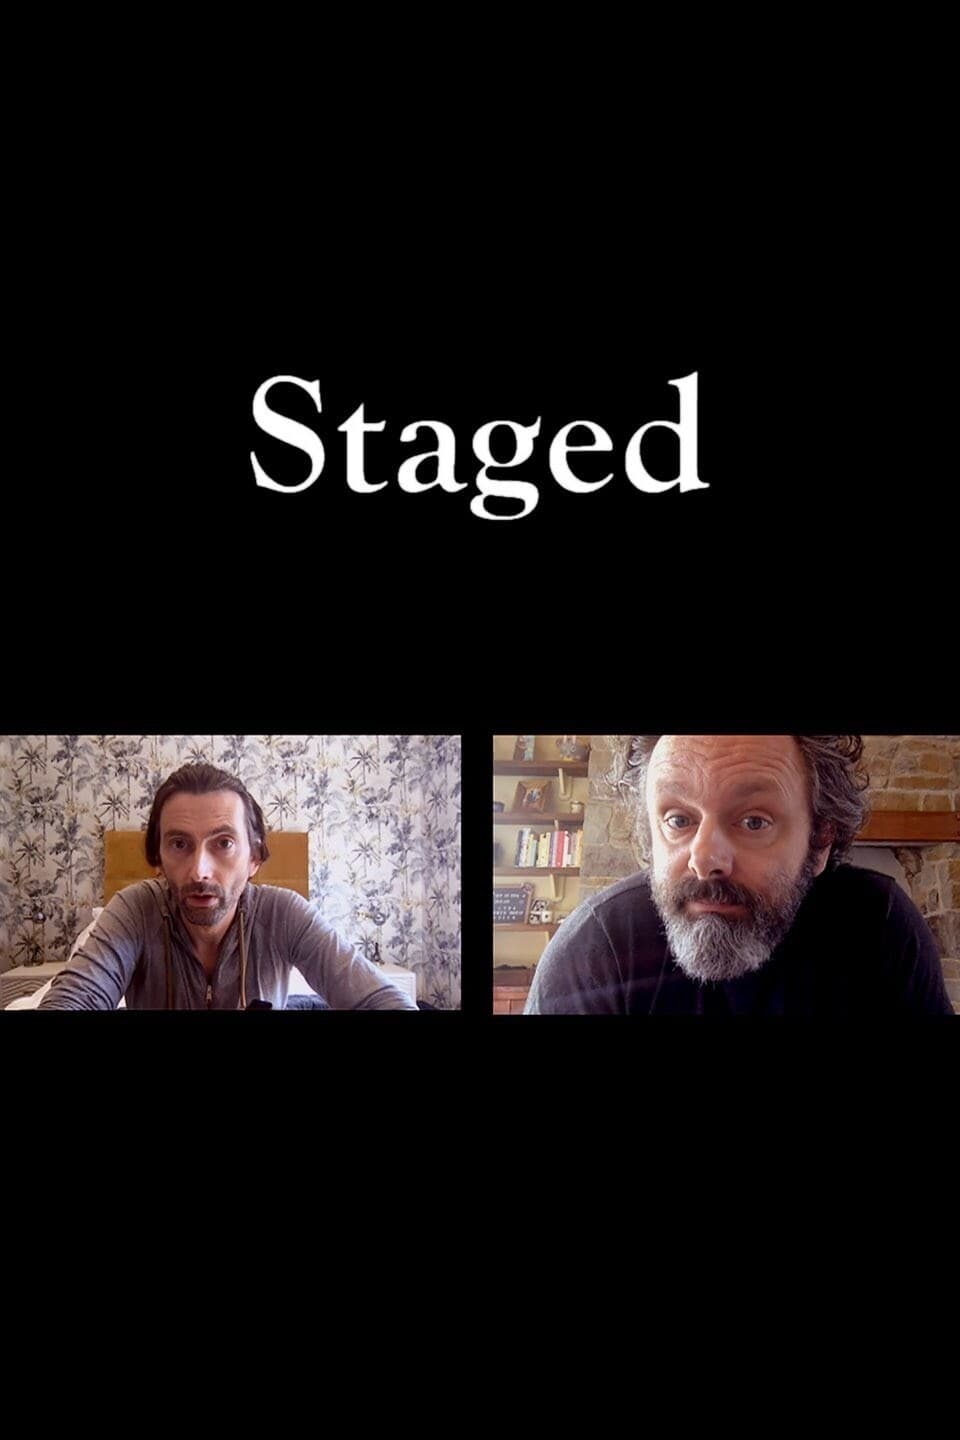 Staged rating